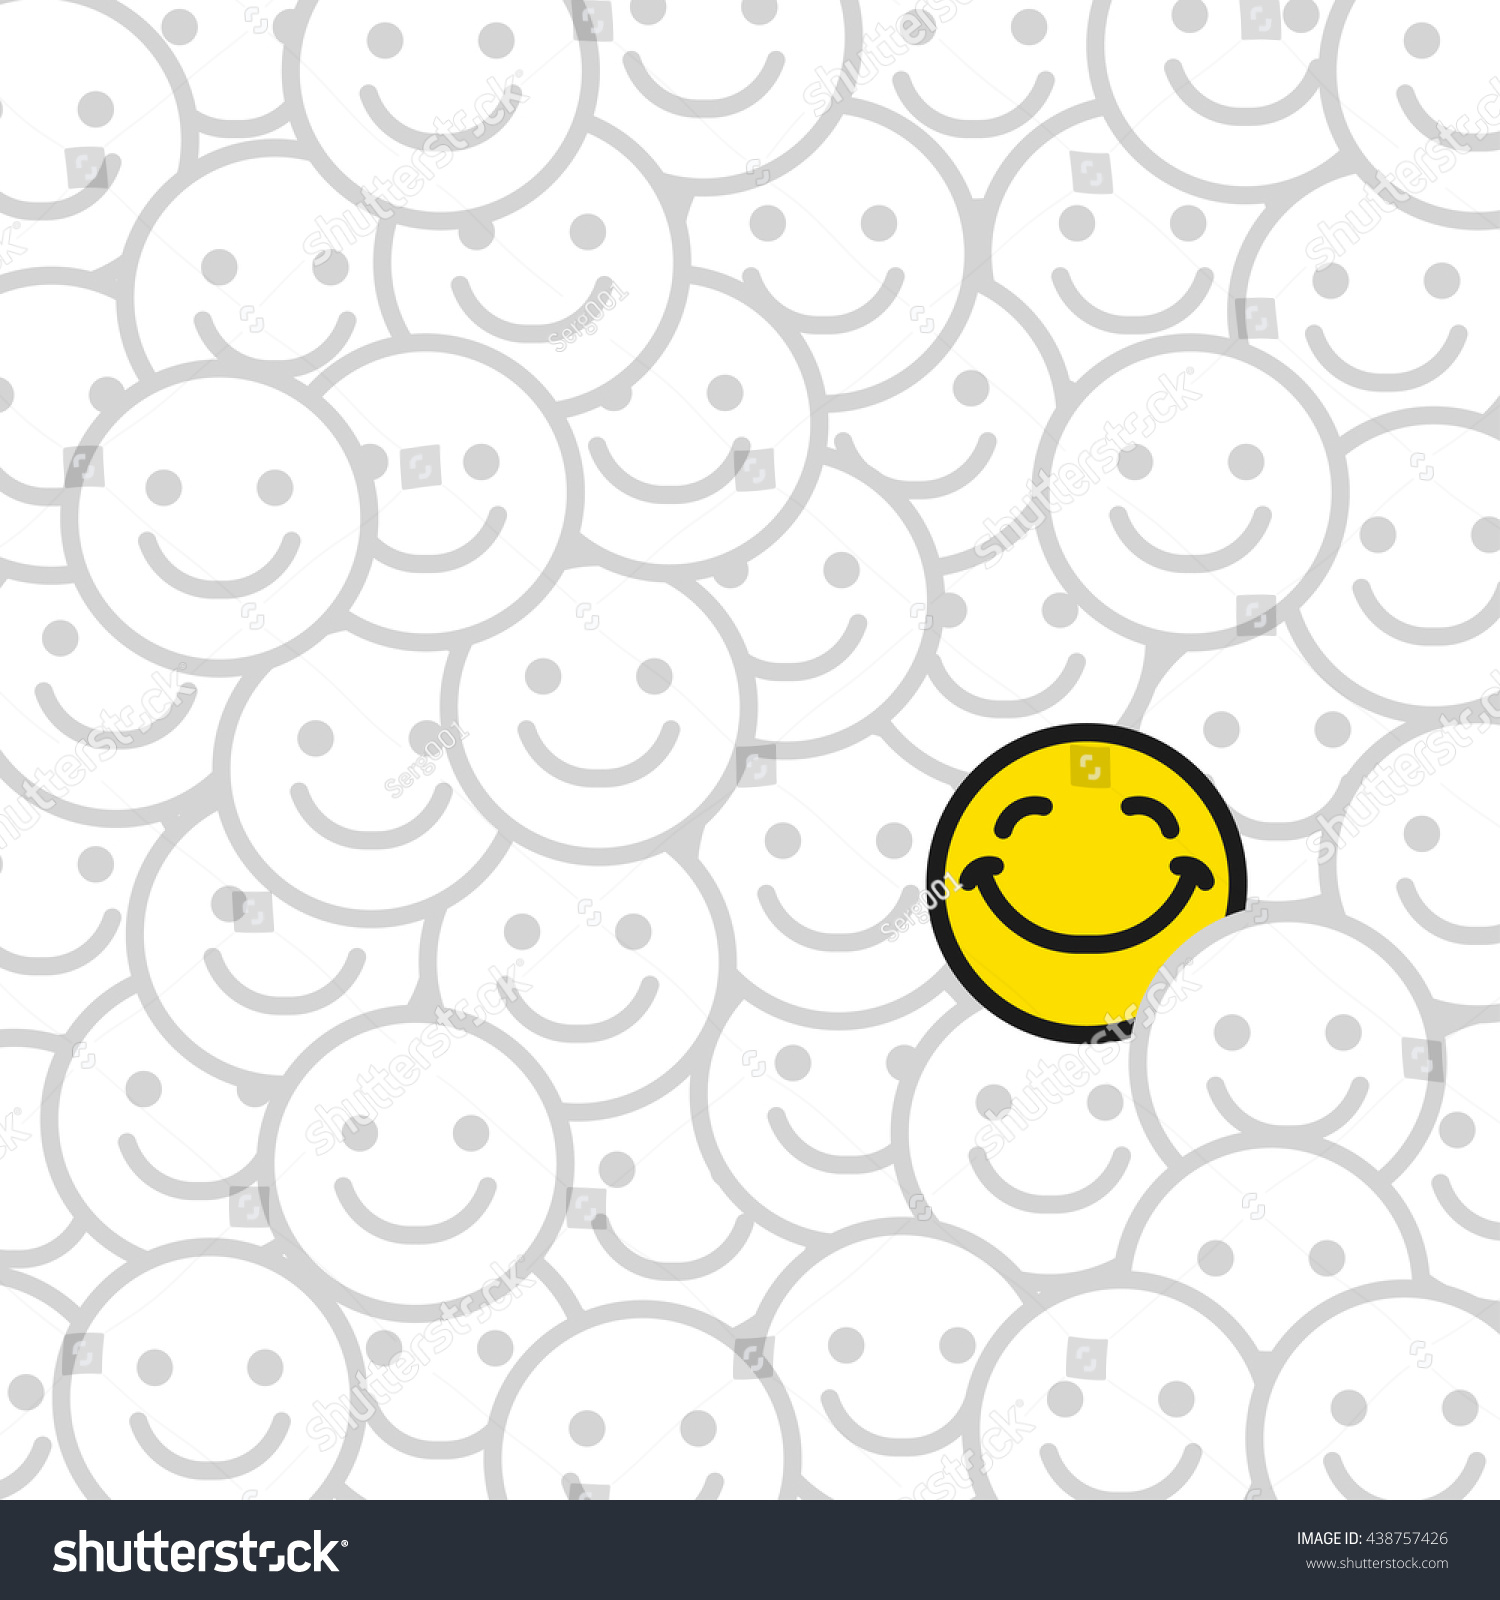 Positive Smile Faces Abstract Background Smiling Stock Vector